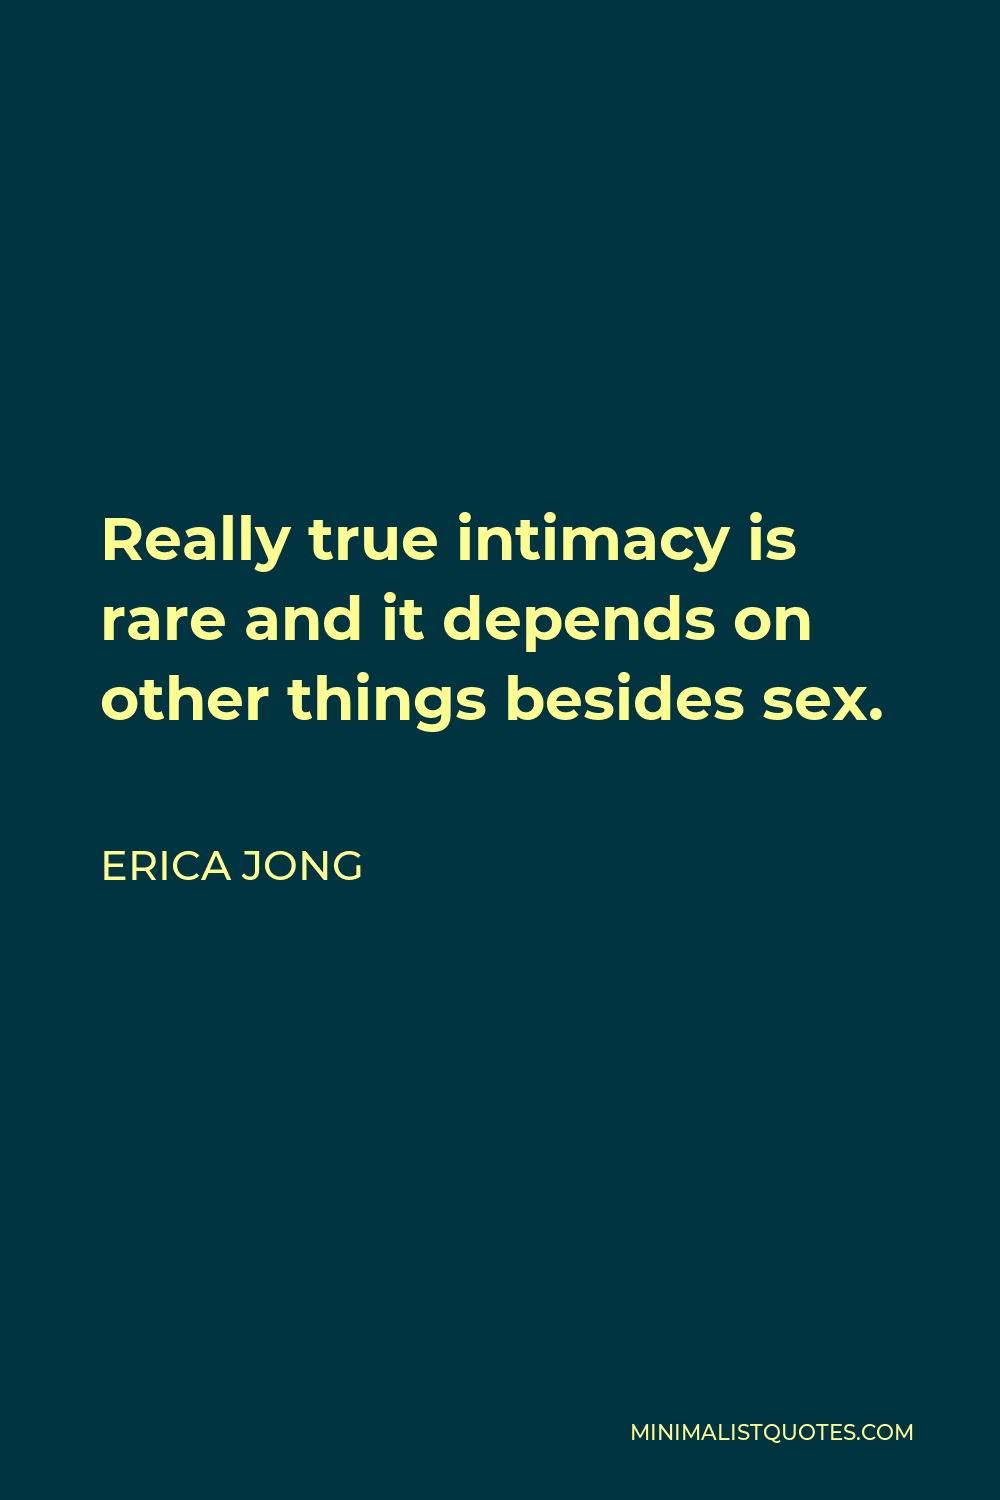 Erica Jong Quote - Really true intimacy is rare and it depends on other things besides sex.